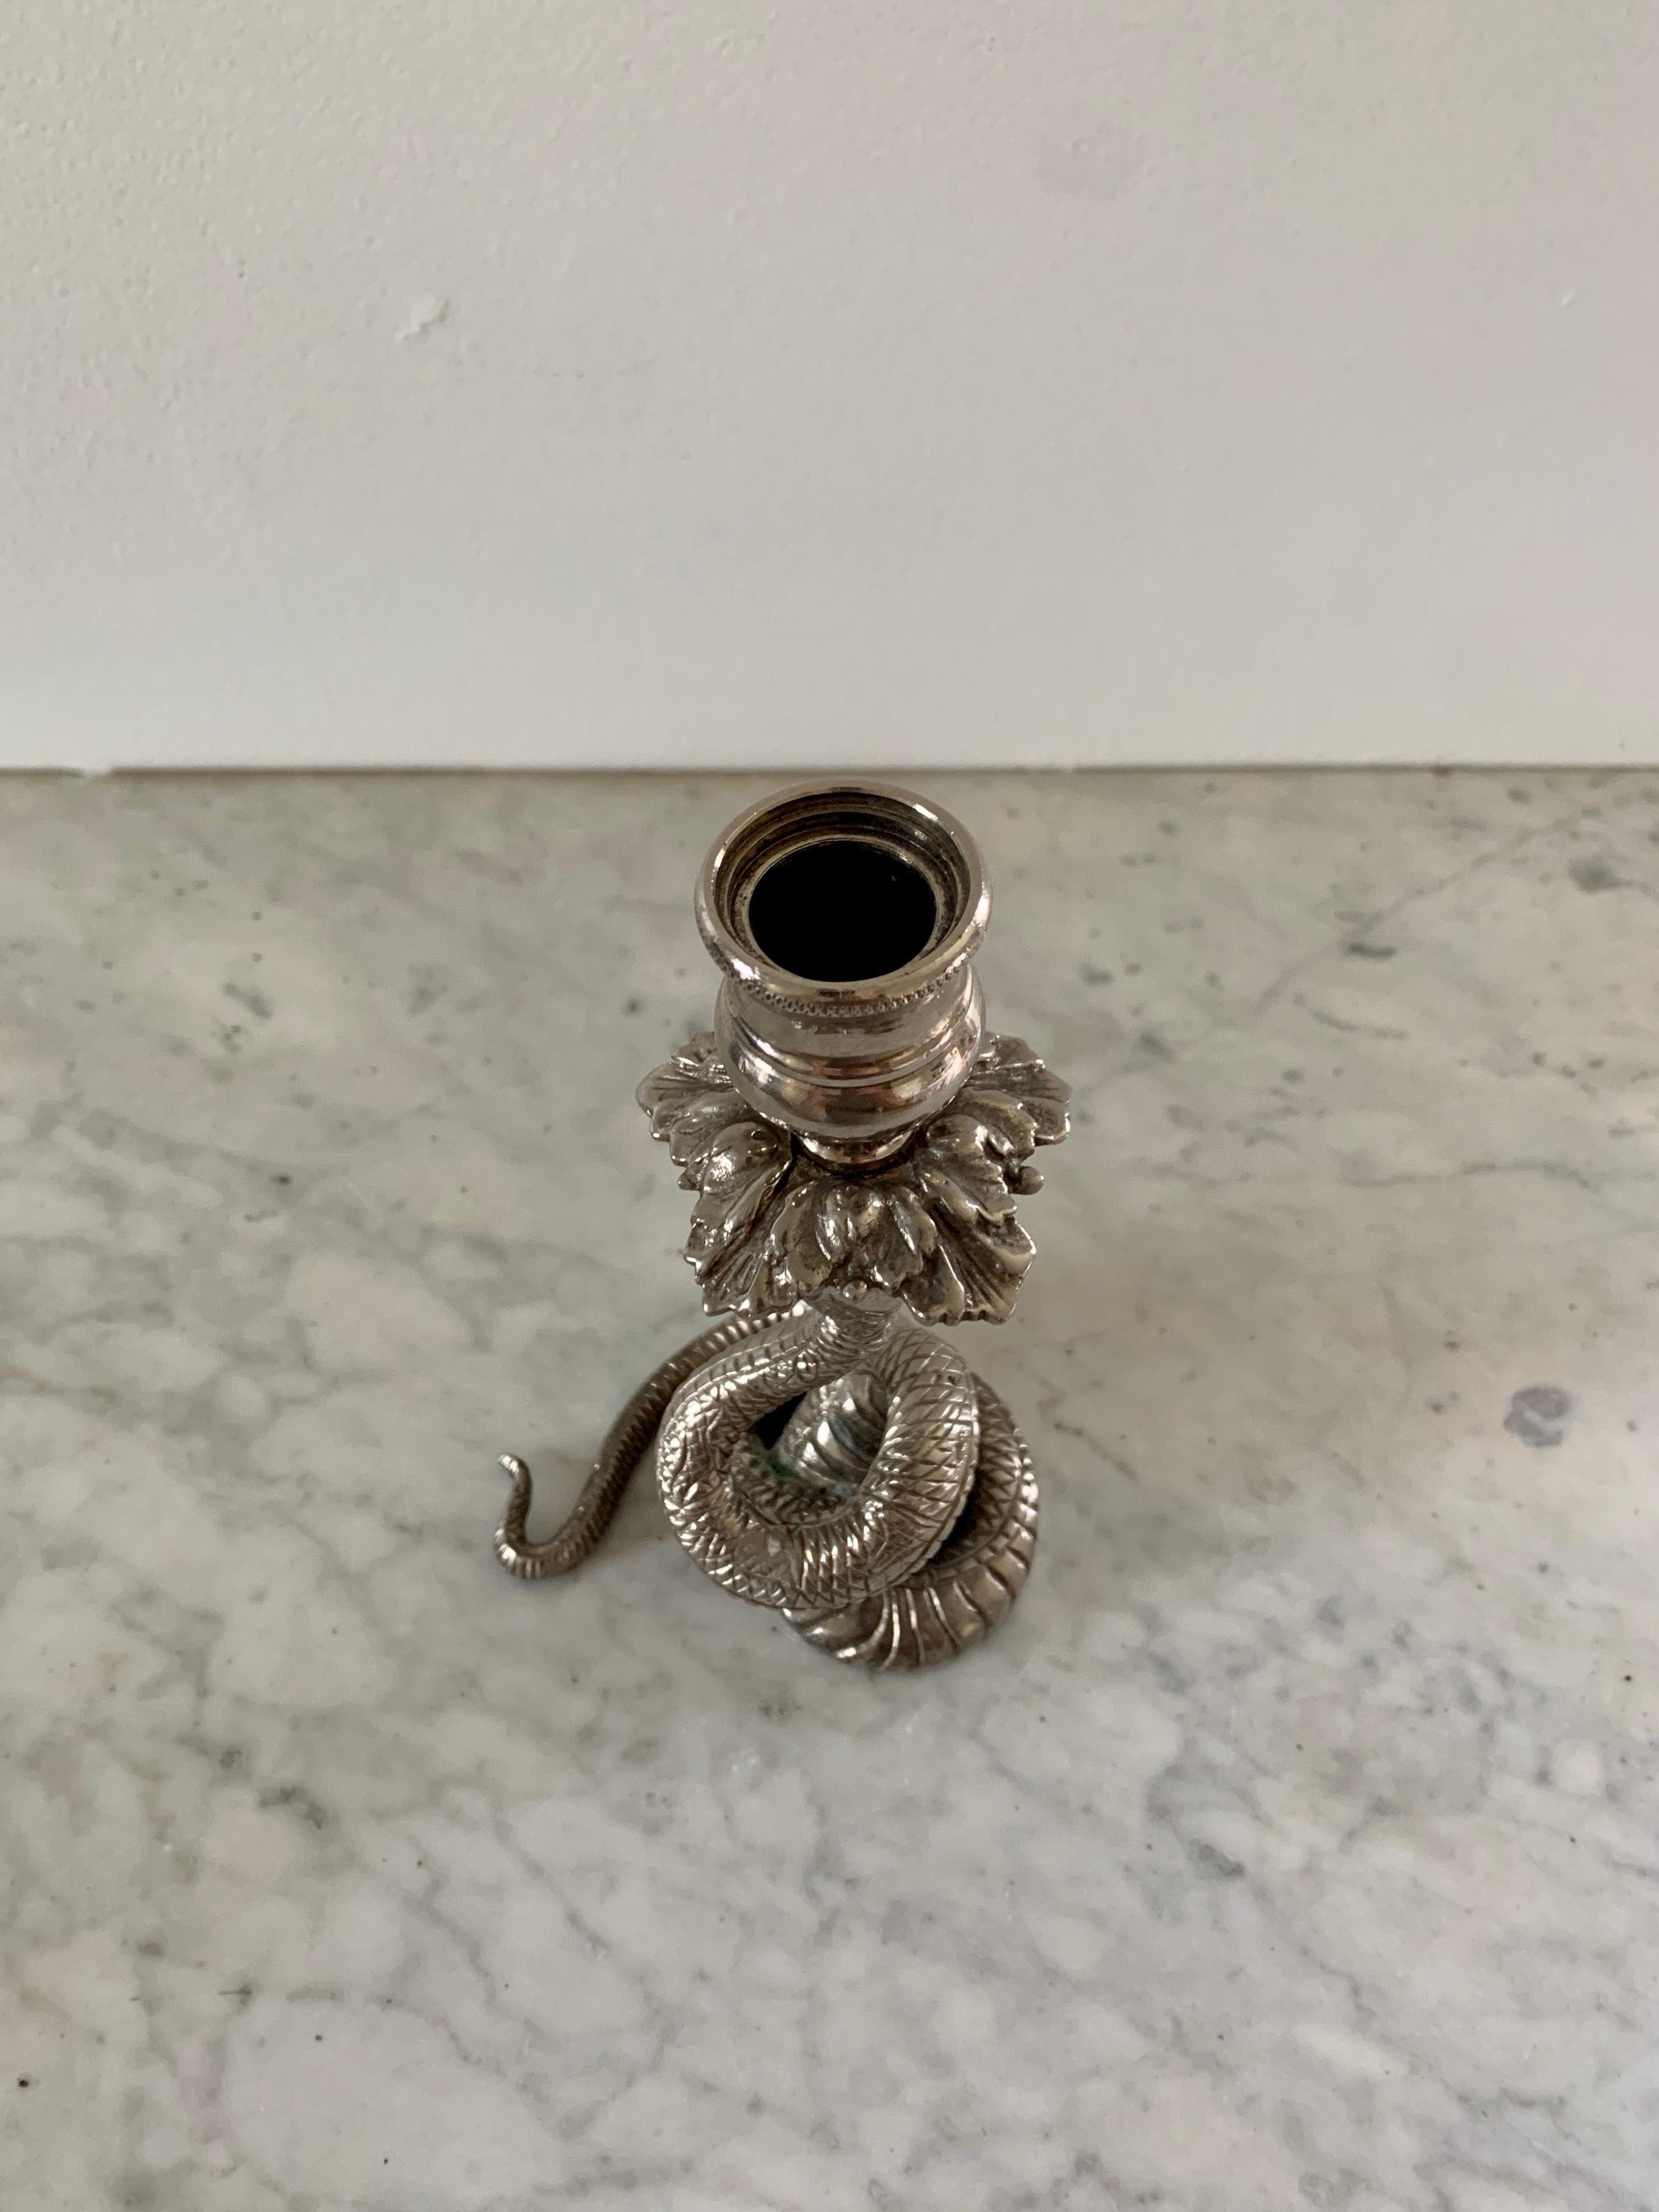 A wonderful Art Deco style silvered brass snake candle holder.

Circa mid-20th century

Measures: 4.5